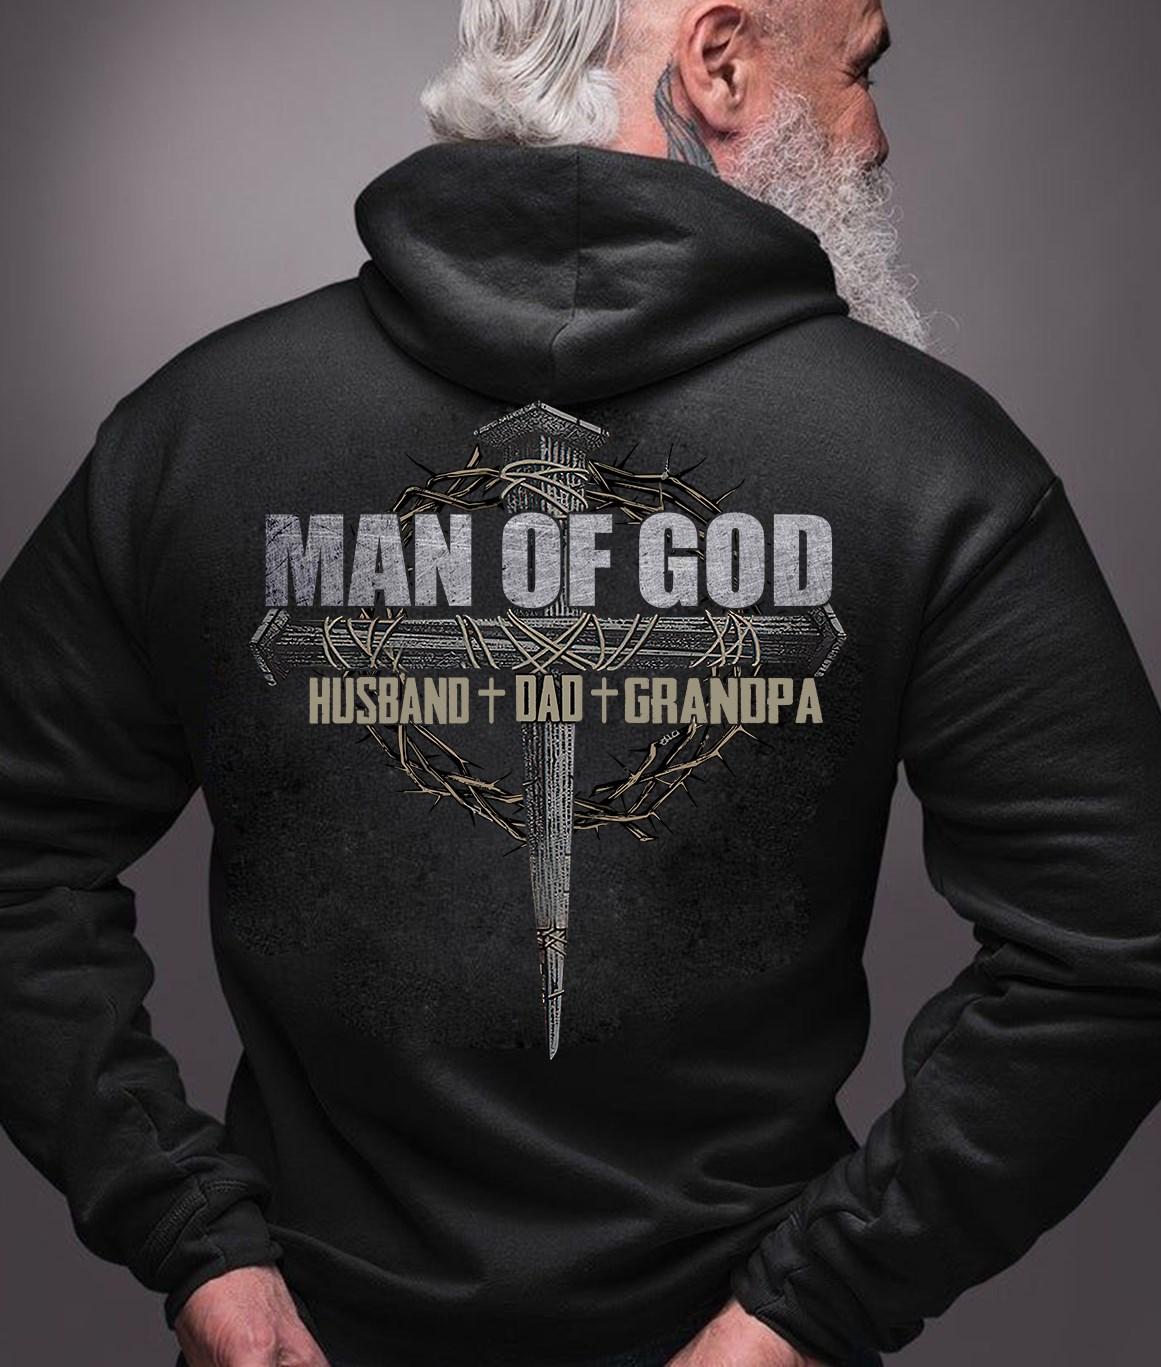 Man of God - Husband dad grandpa, father's day gift, Believe in Jesus